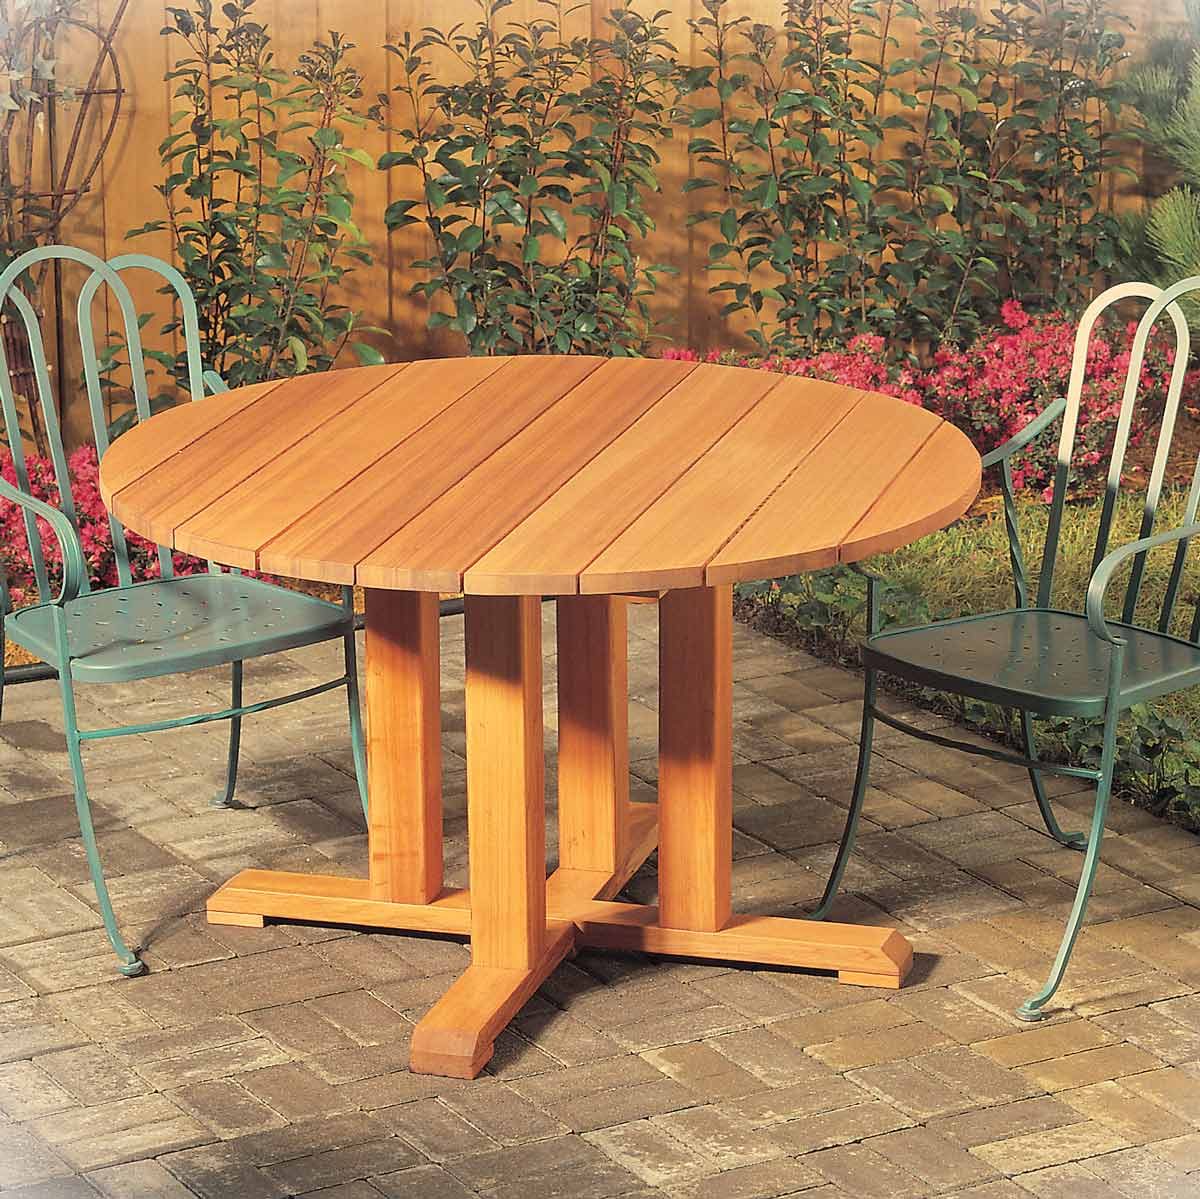 10 DIY Tables You Can Build Quickly — The Family Handyman